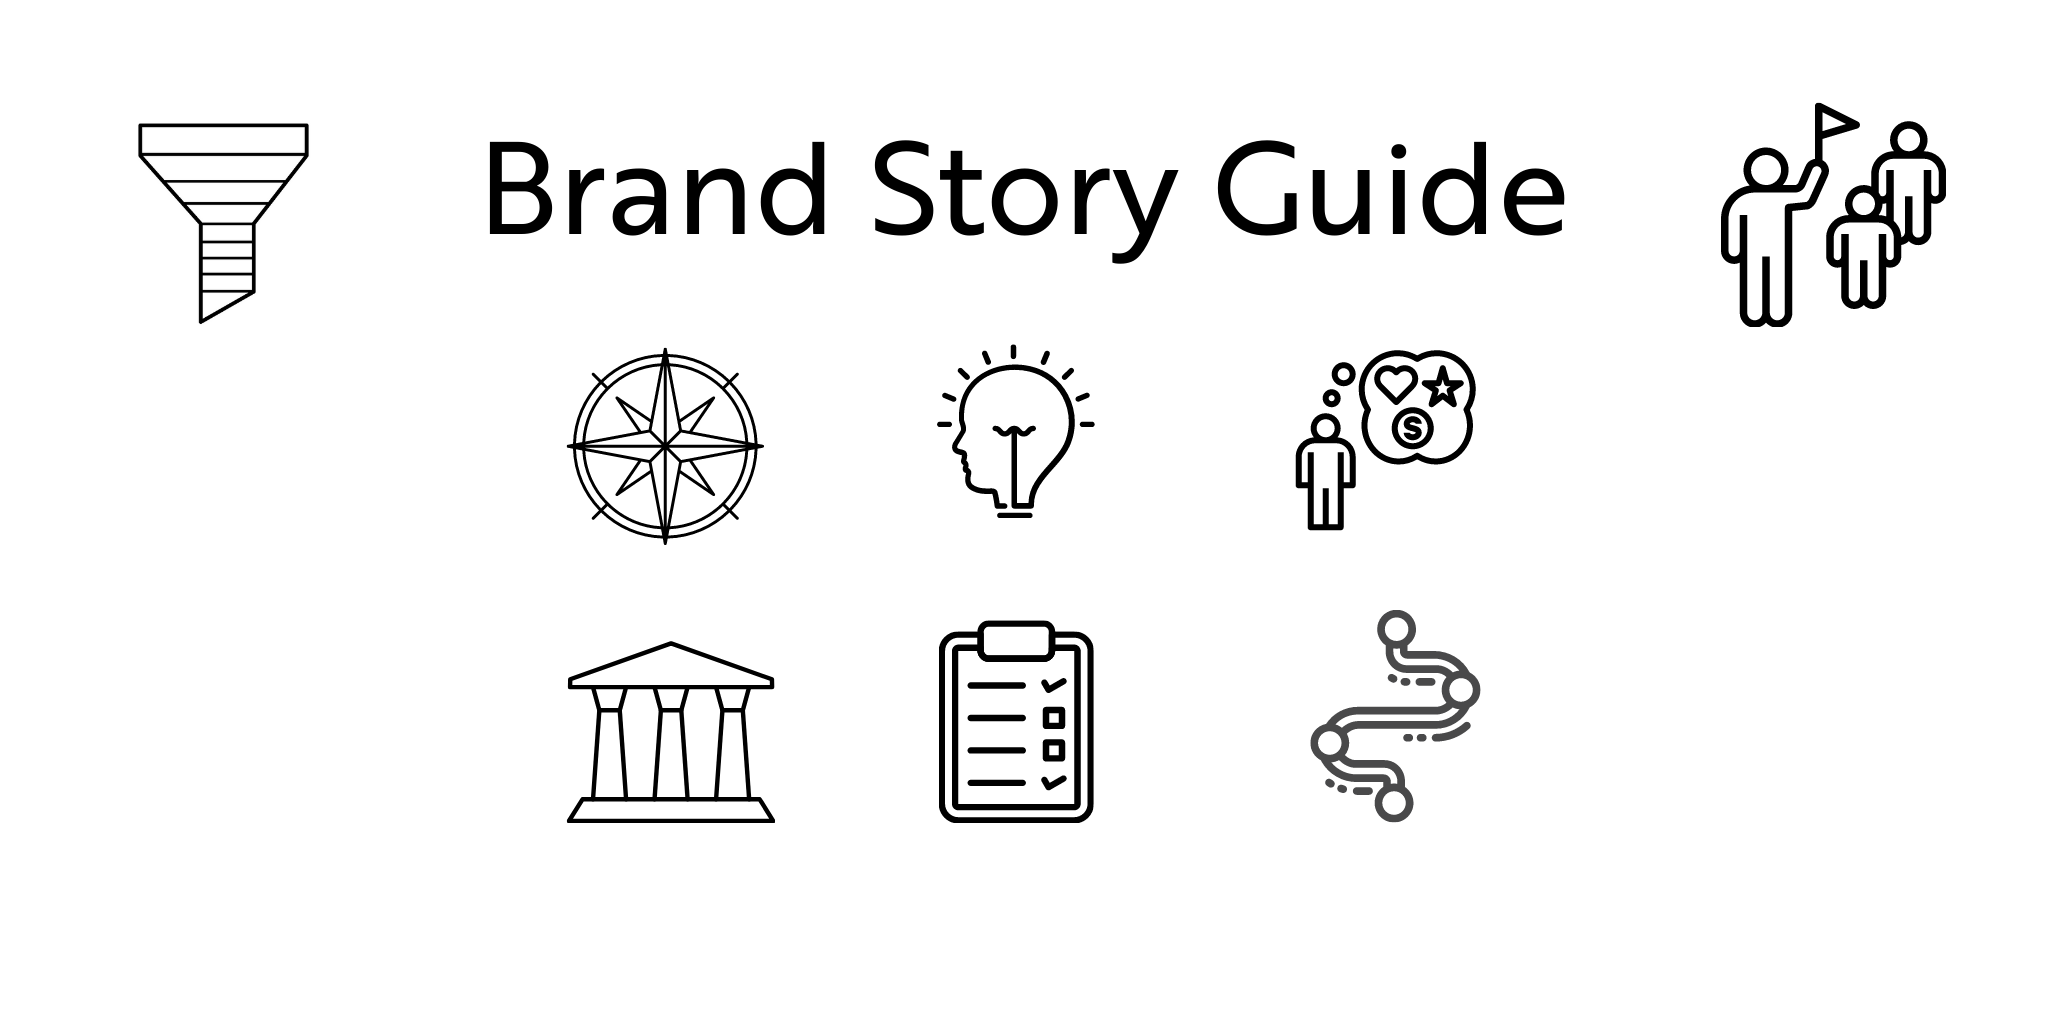 Brand Story Guides